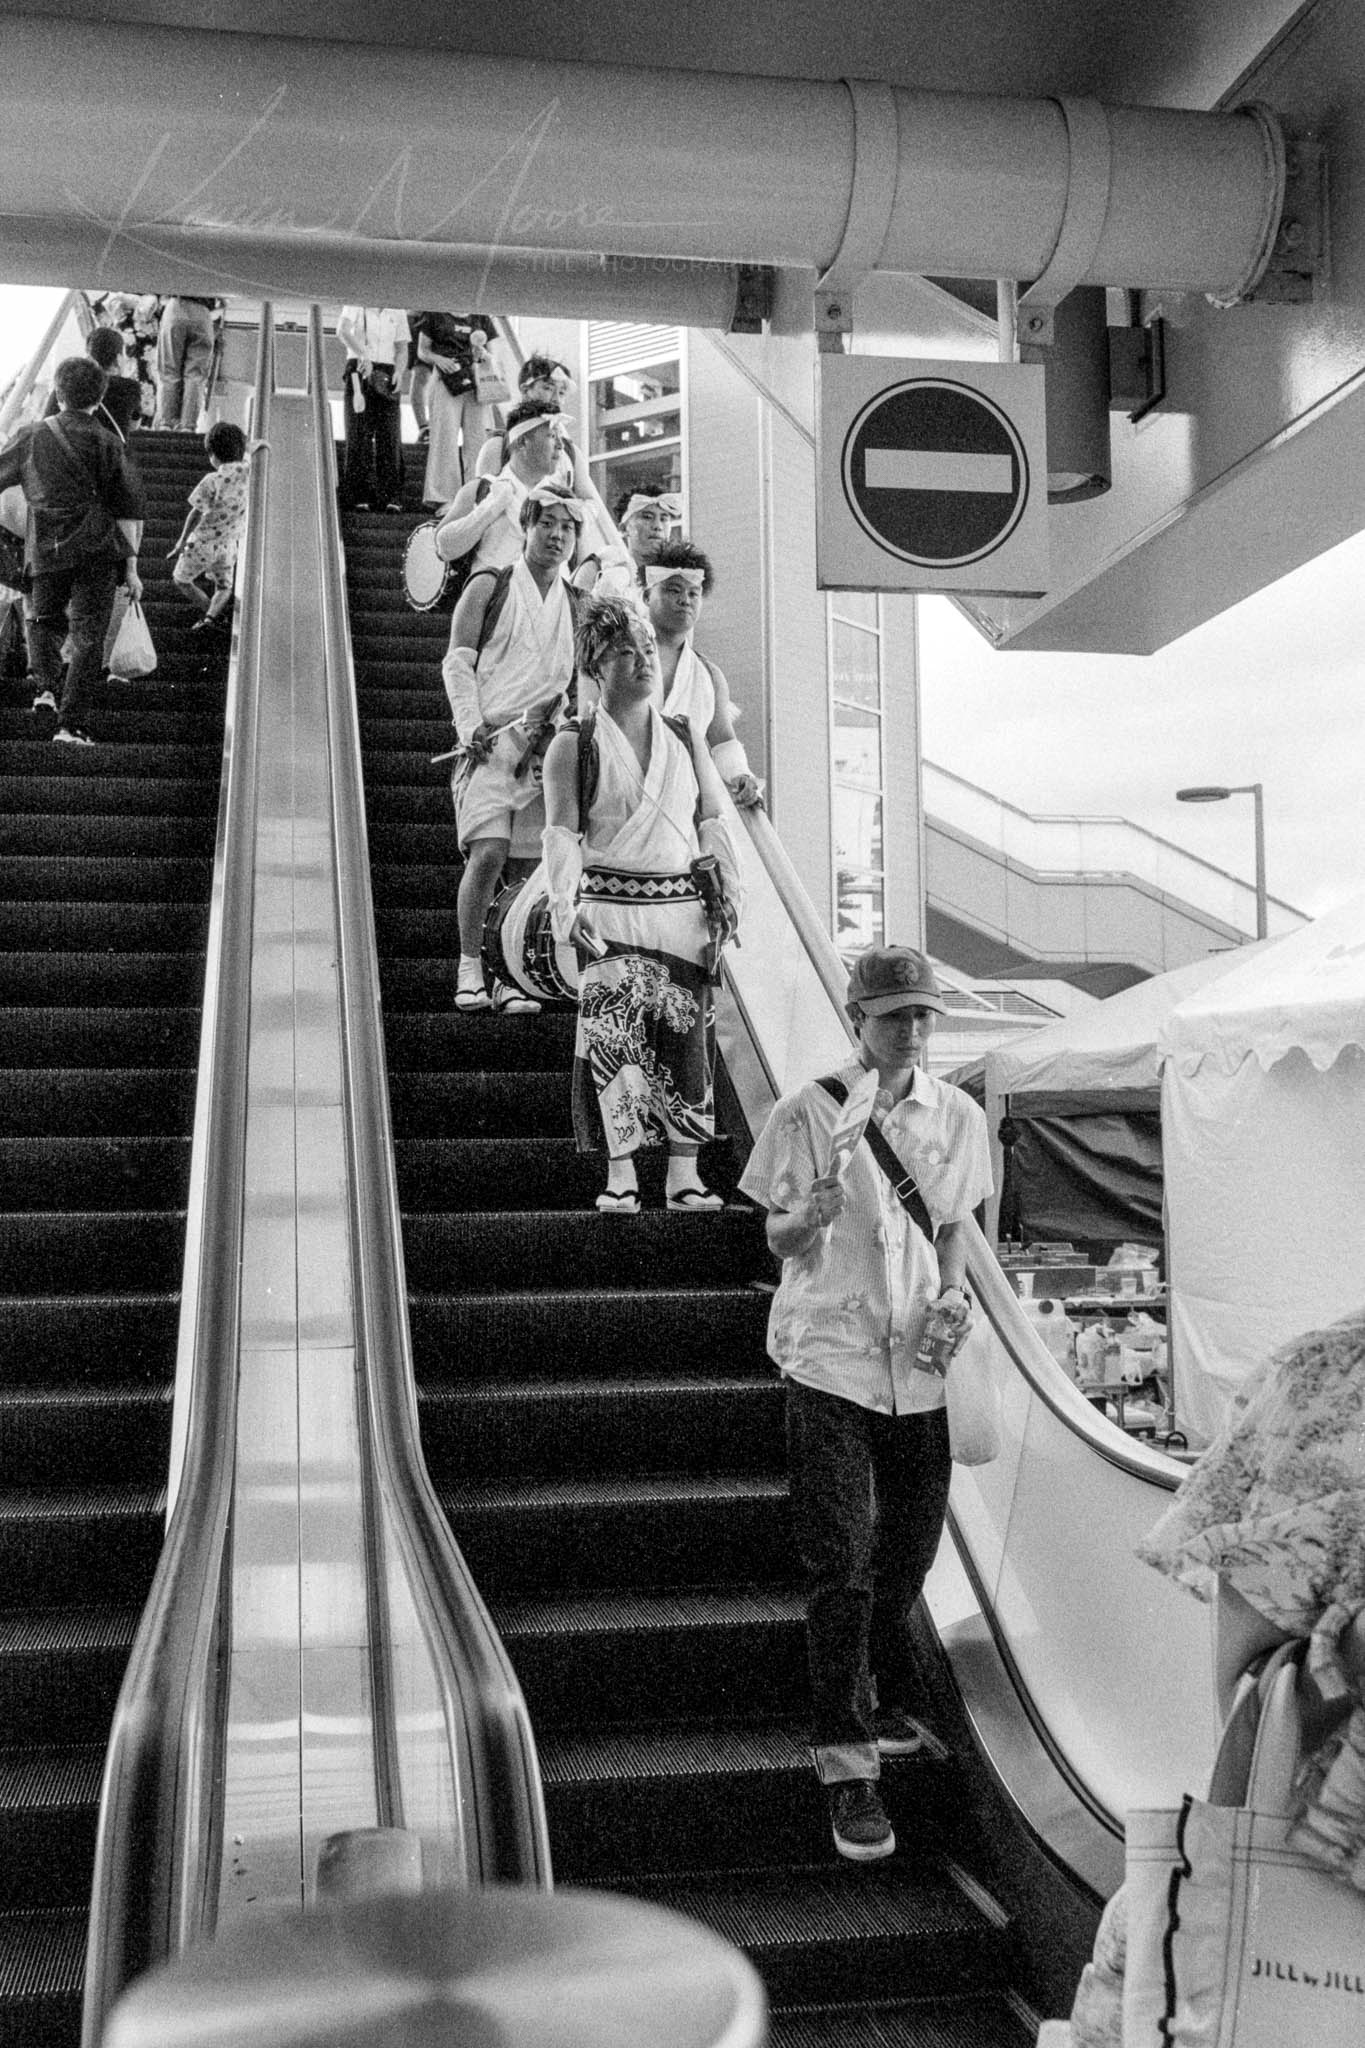 Candid black and white photo of Japanese Jangara performers on an descending escalator.